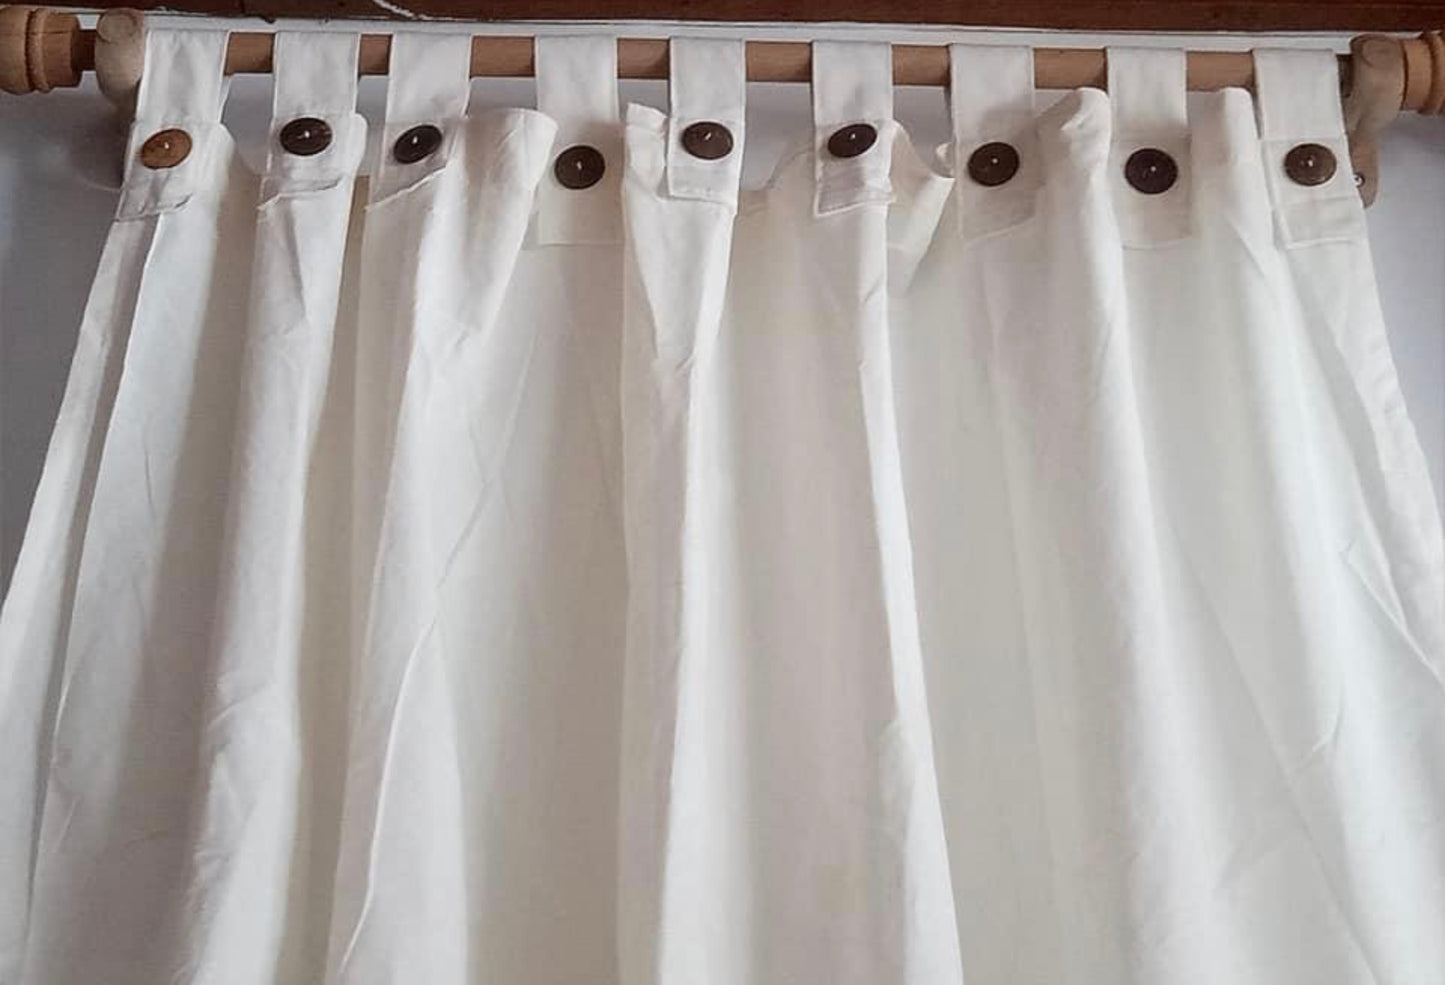 Curtain Calico Natural with velcro tabs feature coconut button